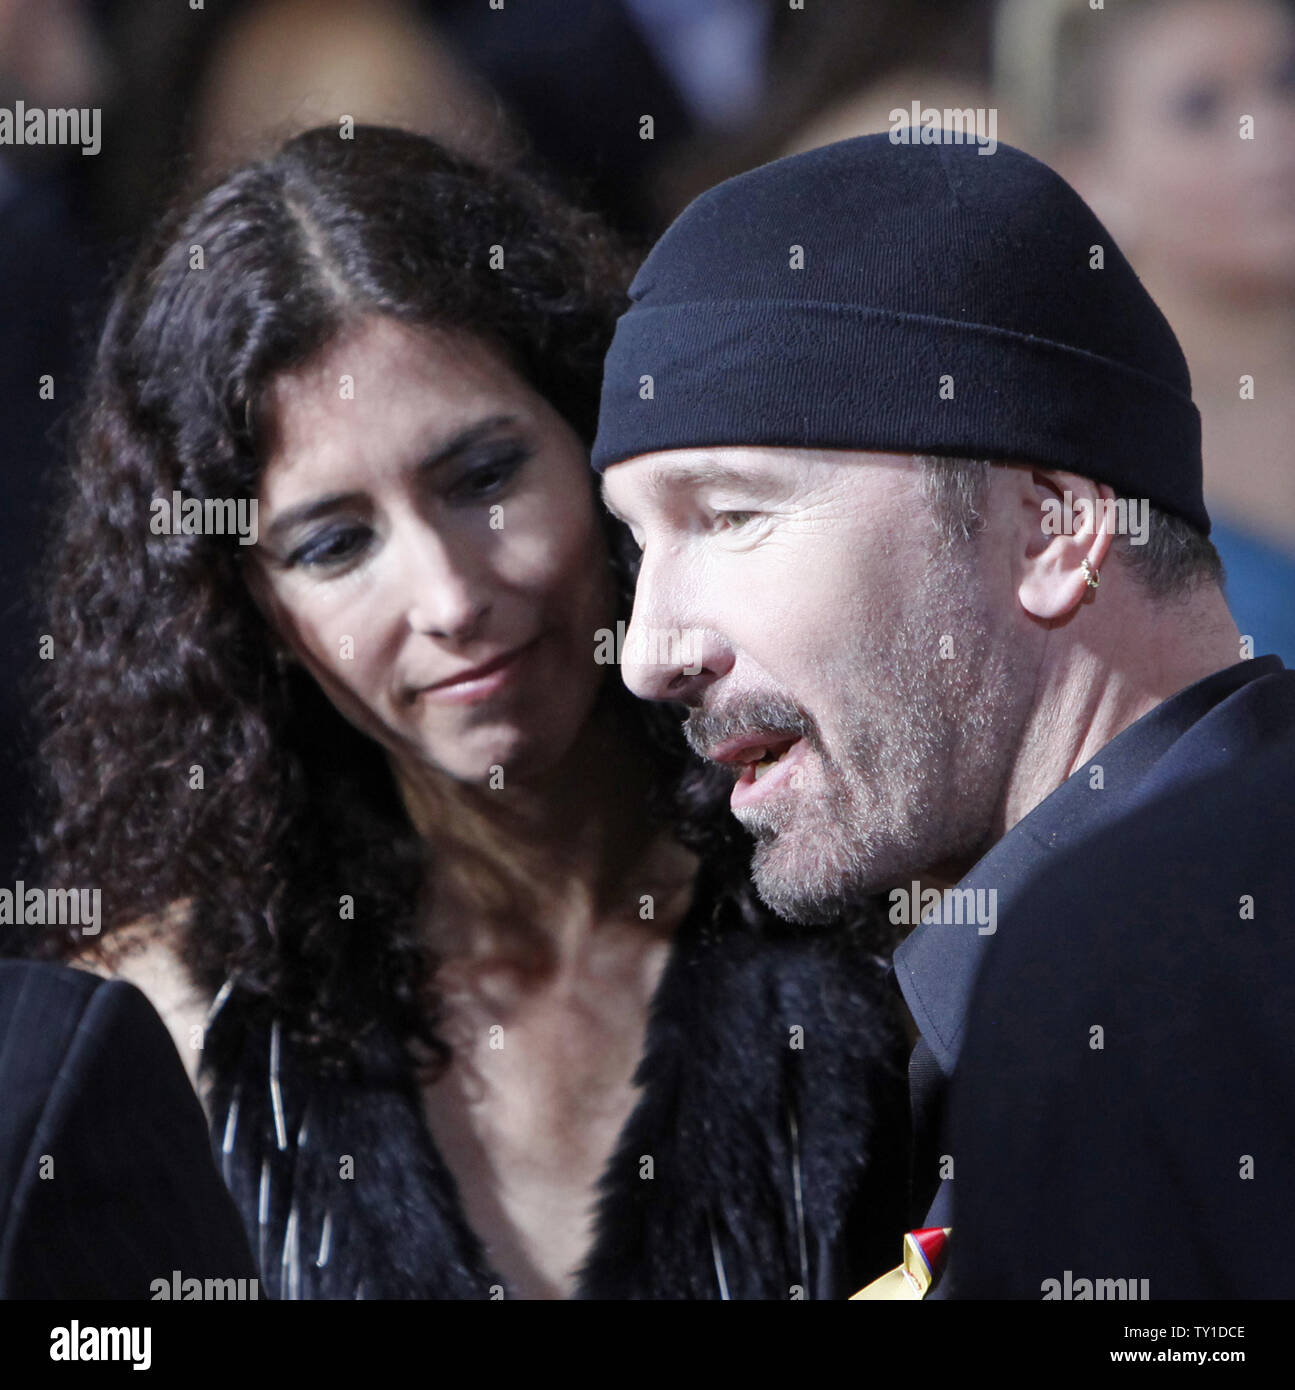 U2 guitarist The Edge (Dave Evans) and his wife Morleigh Steinberg arrive on the red carpet before the 67th annual Golden Globes After-Party in Beverly Hills, California on January 17, 2010.   (UPI/David Silpa) Stock Photo